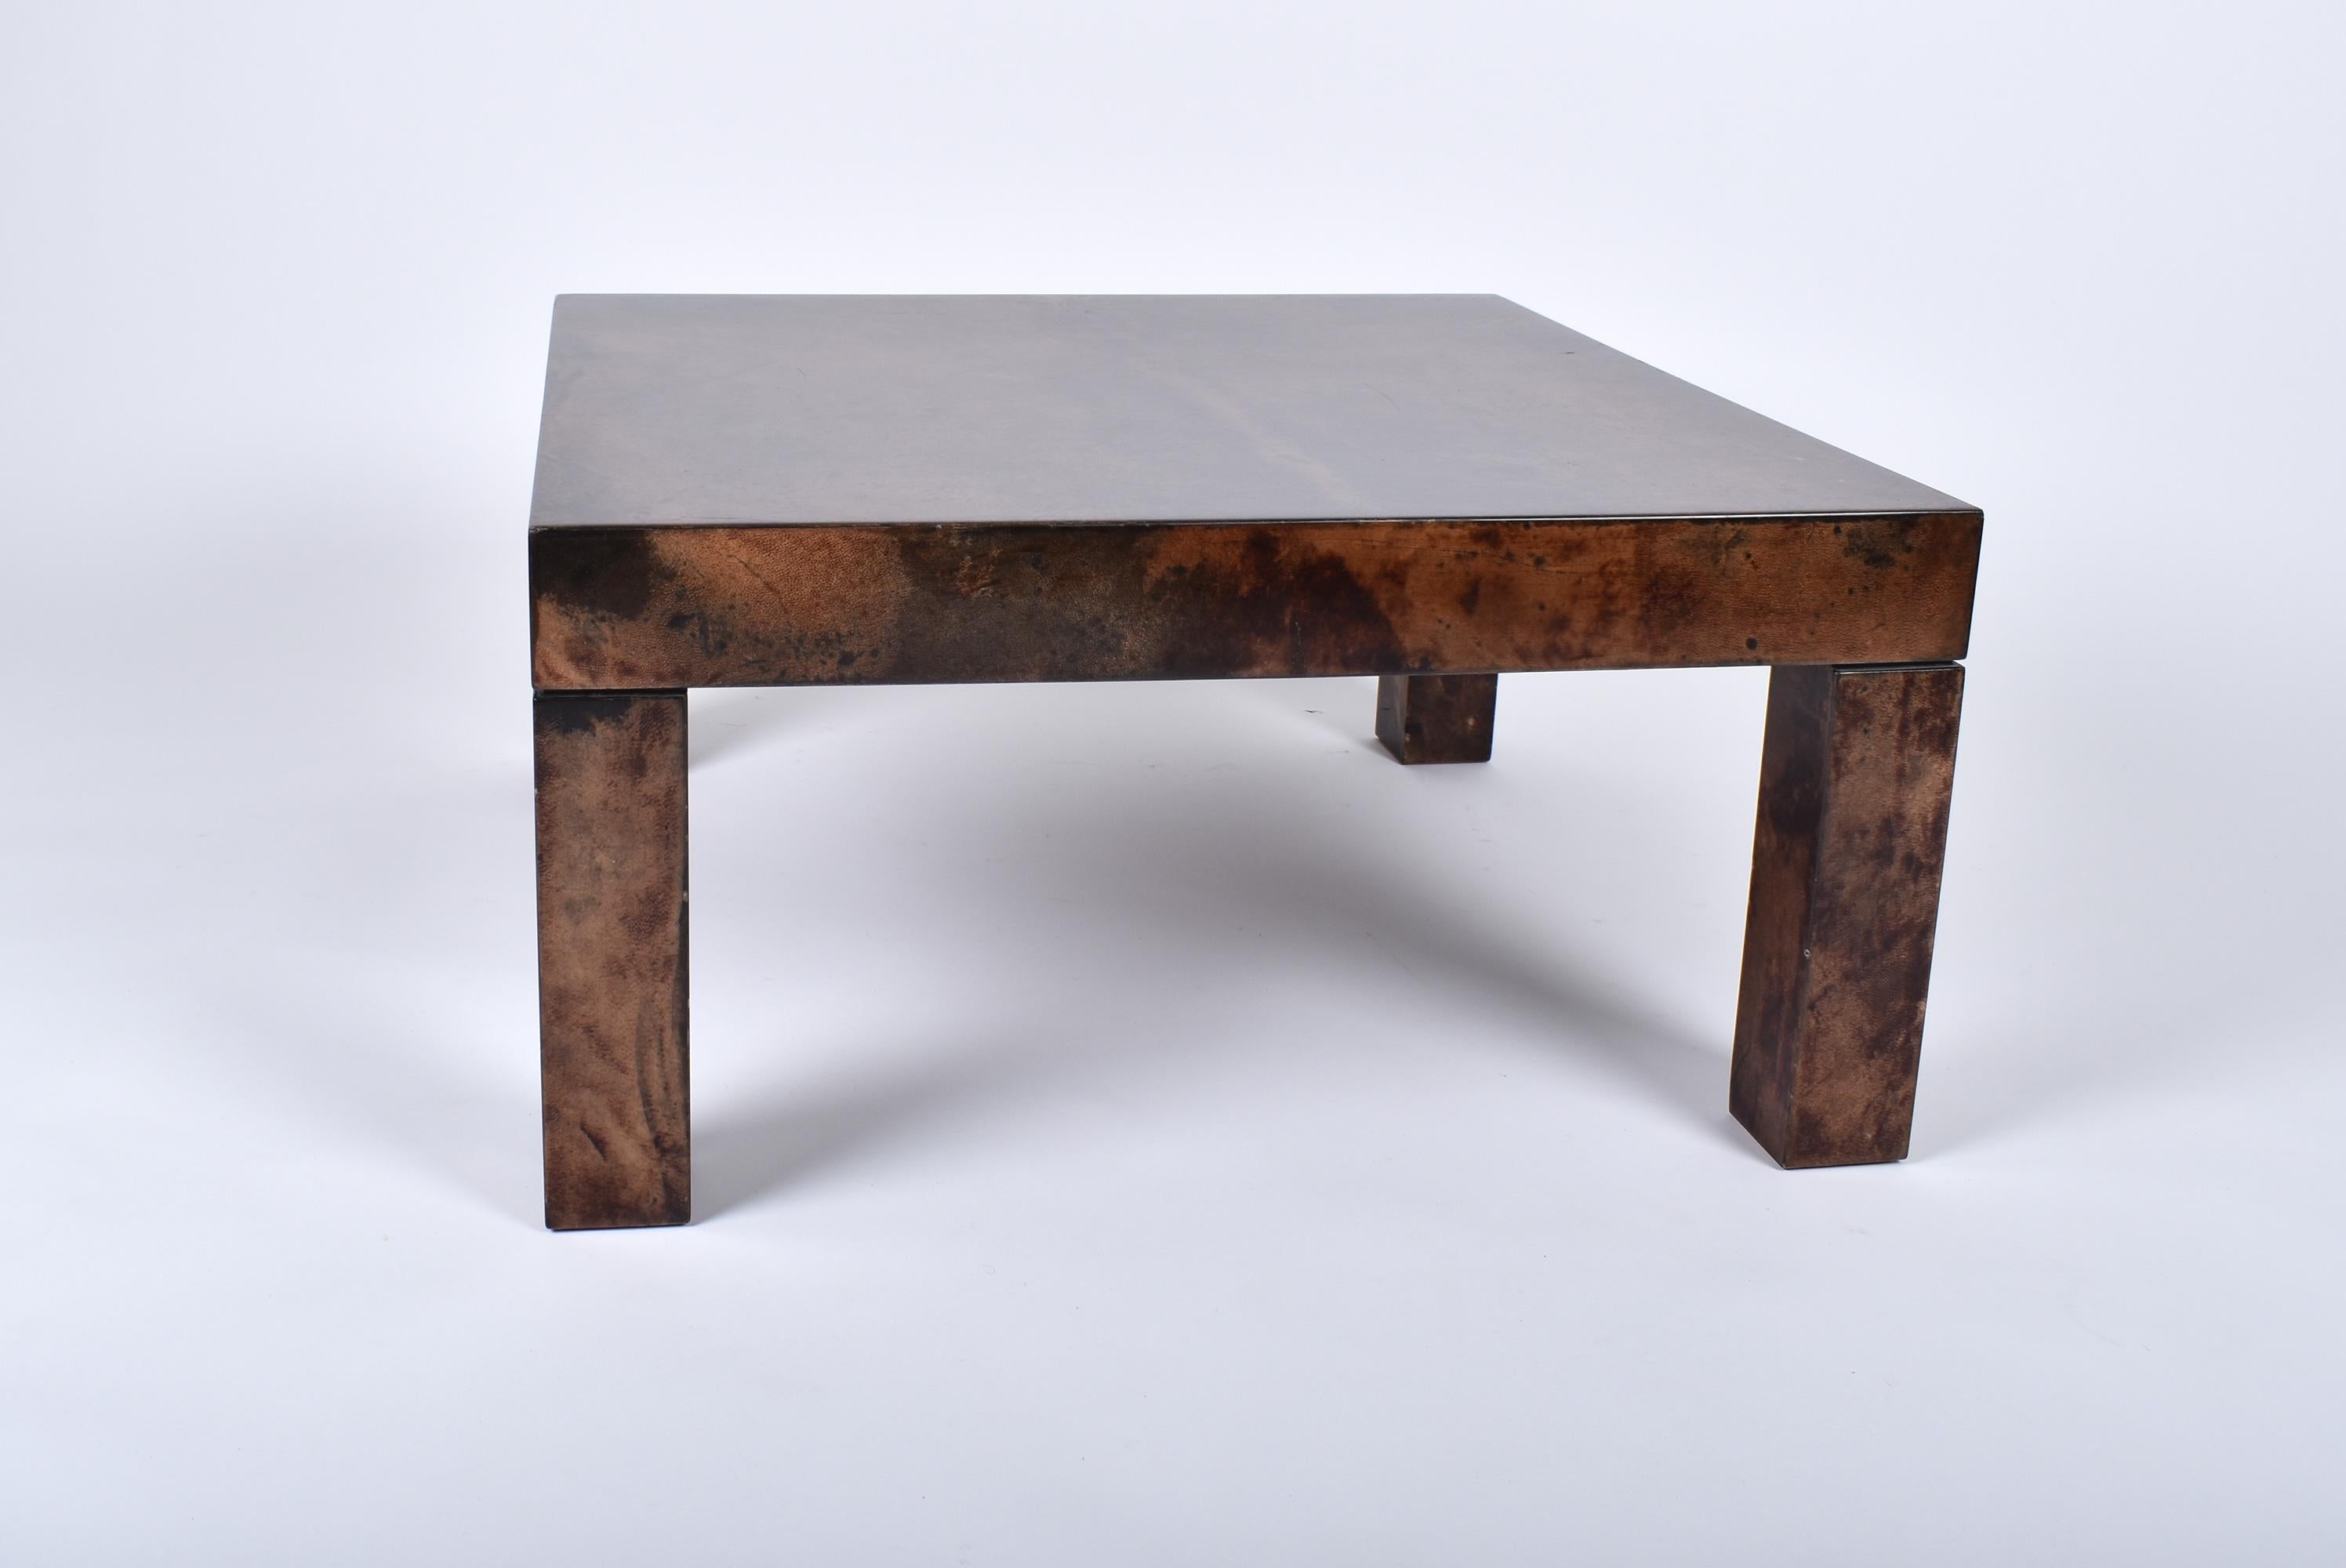 Square coffee table by Aldo Tura.
Distinctive use of goatskin layered with a high gloss varnish.
Good original condition, beautiful shade.
  